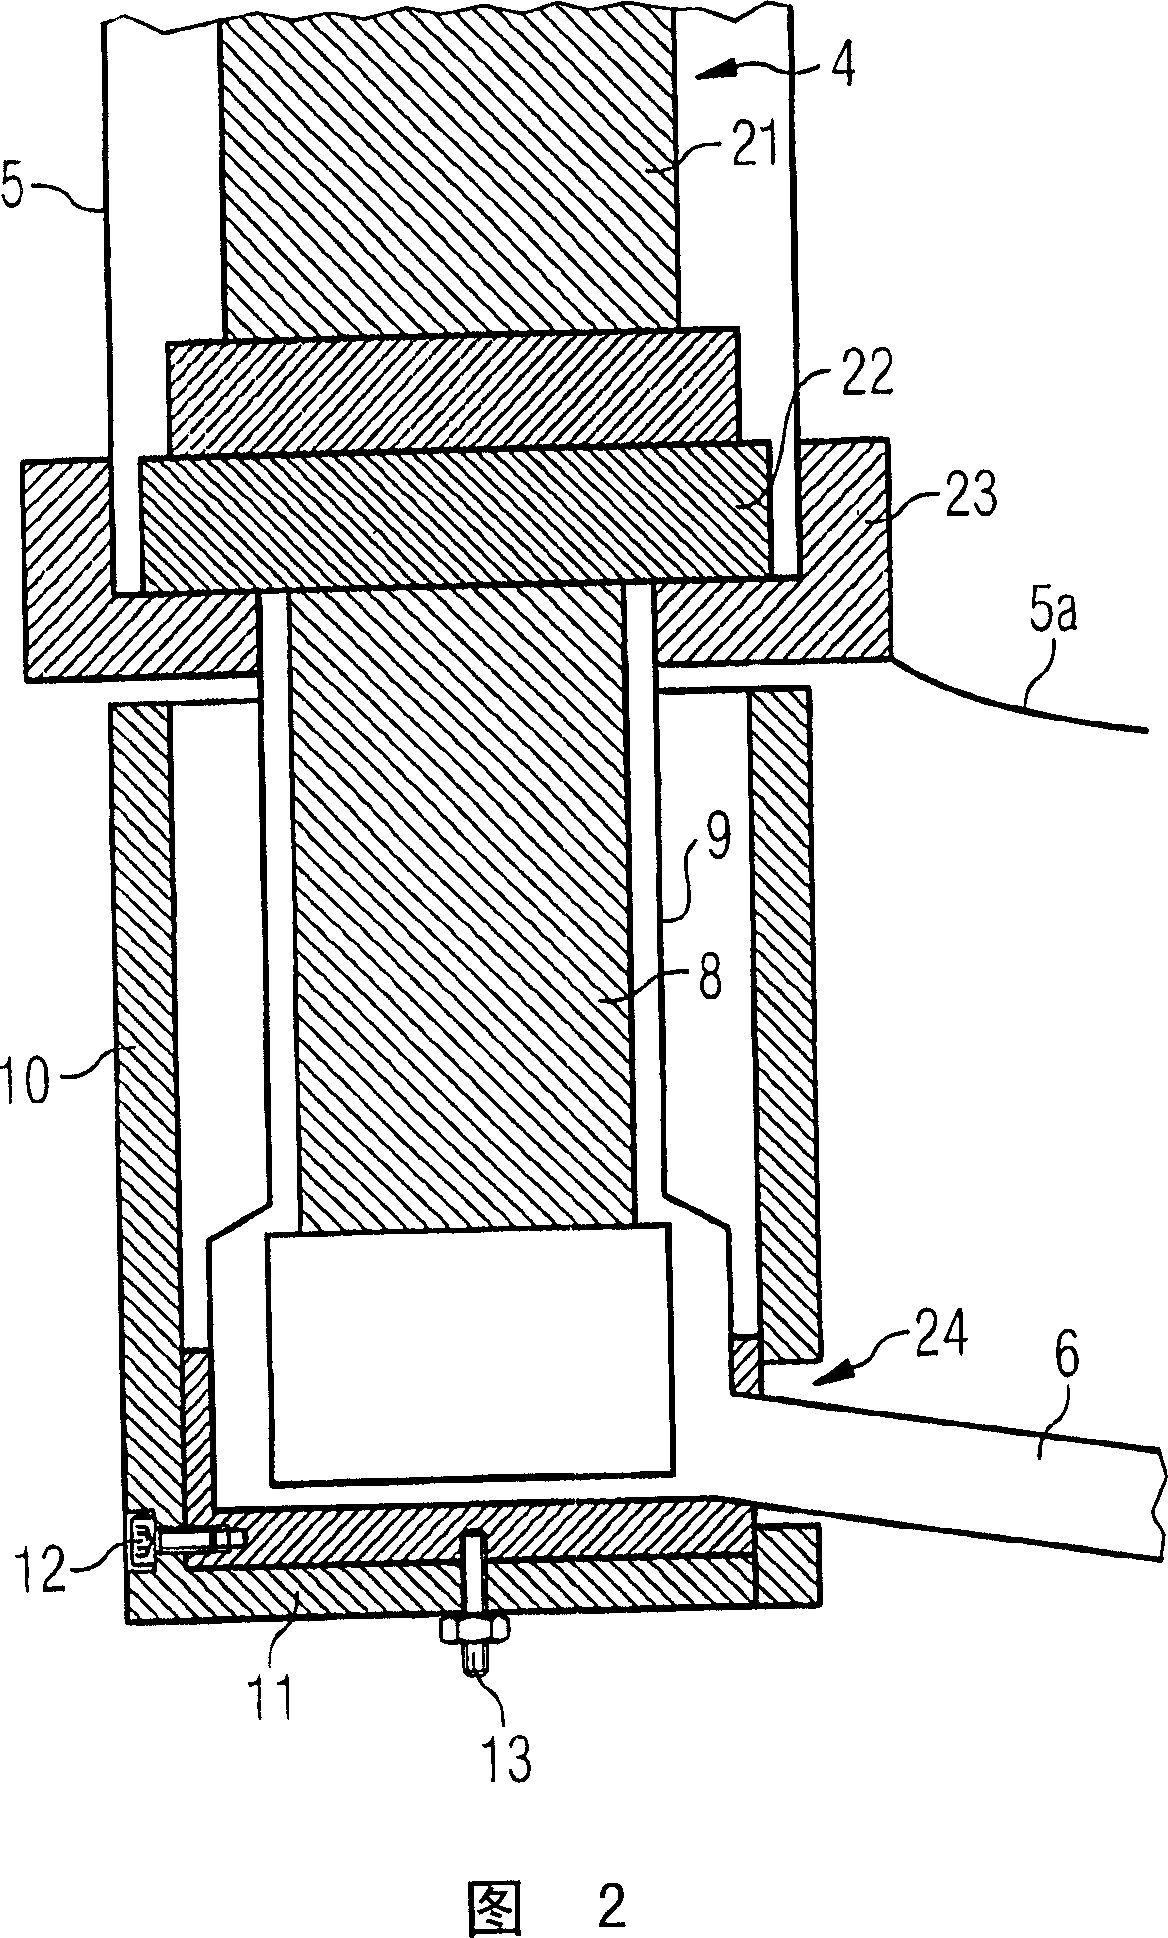 Electrically conductive shield for refrigerator